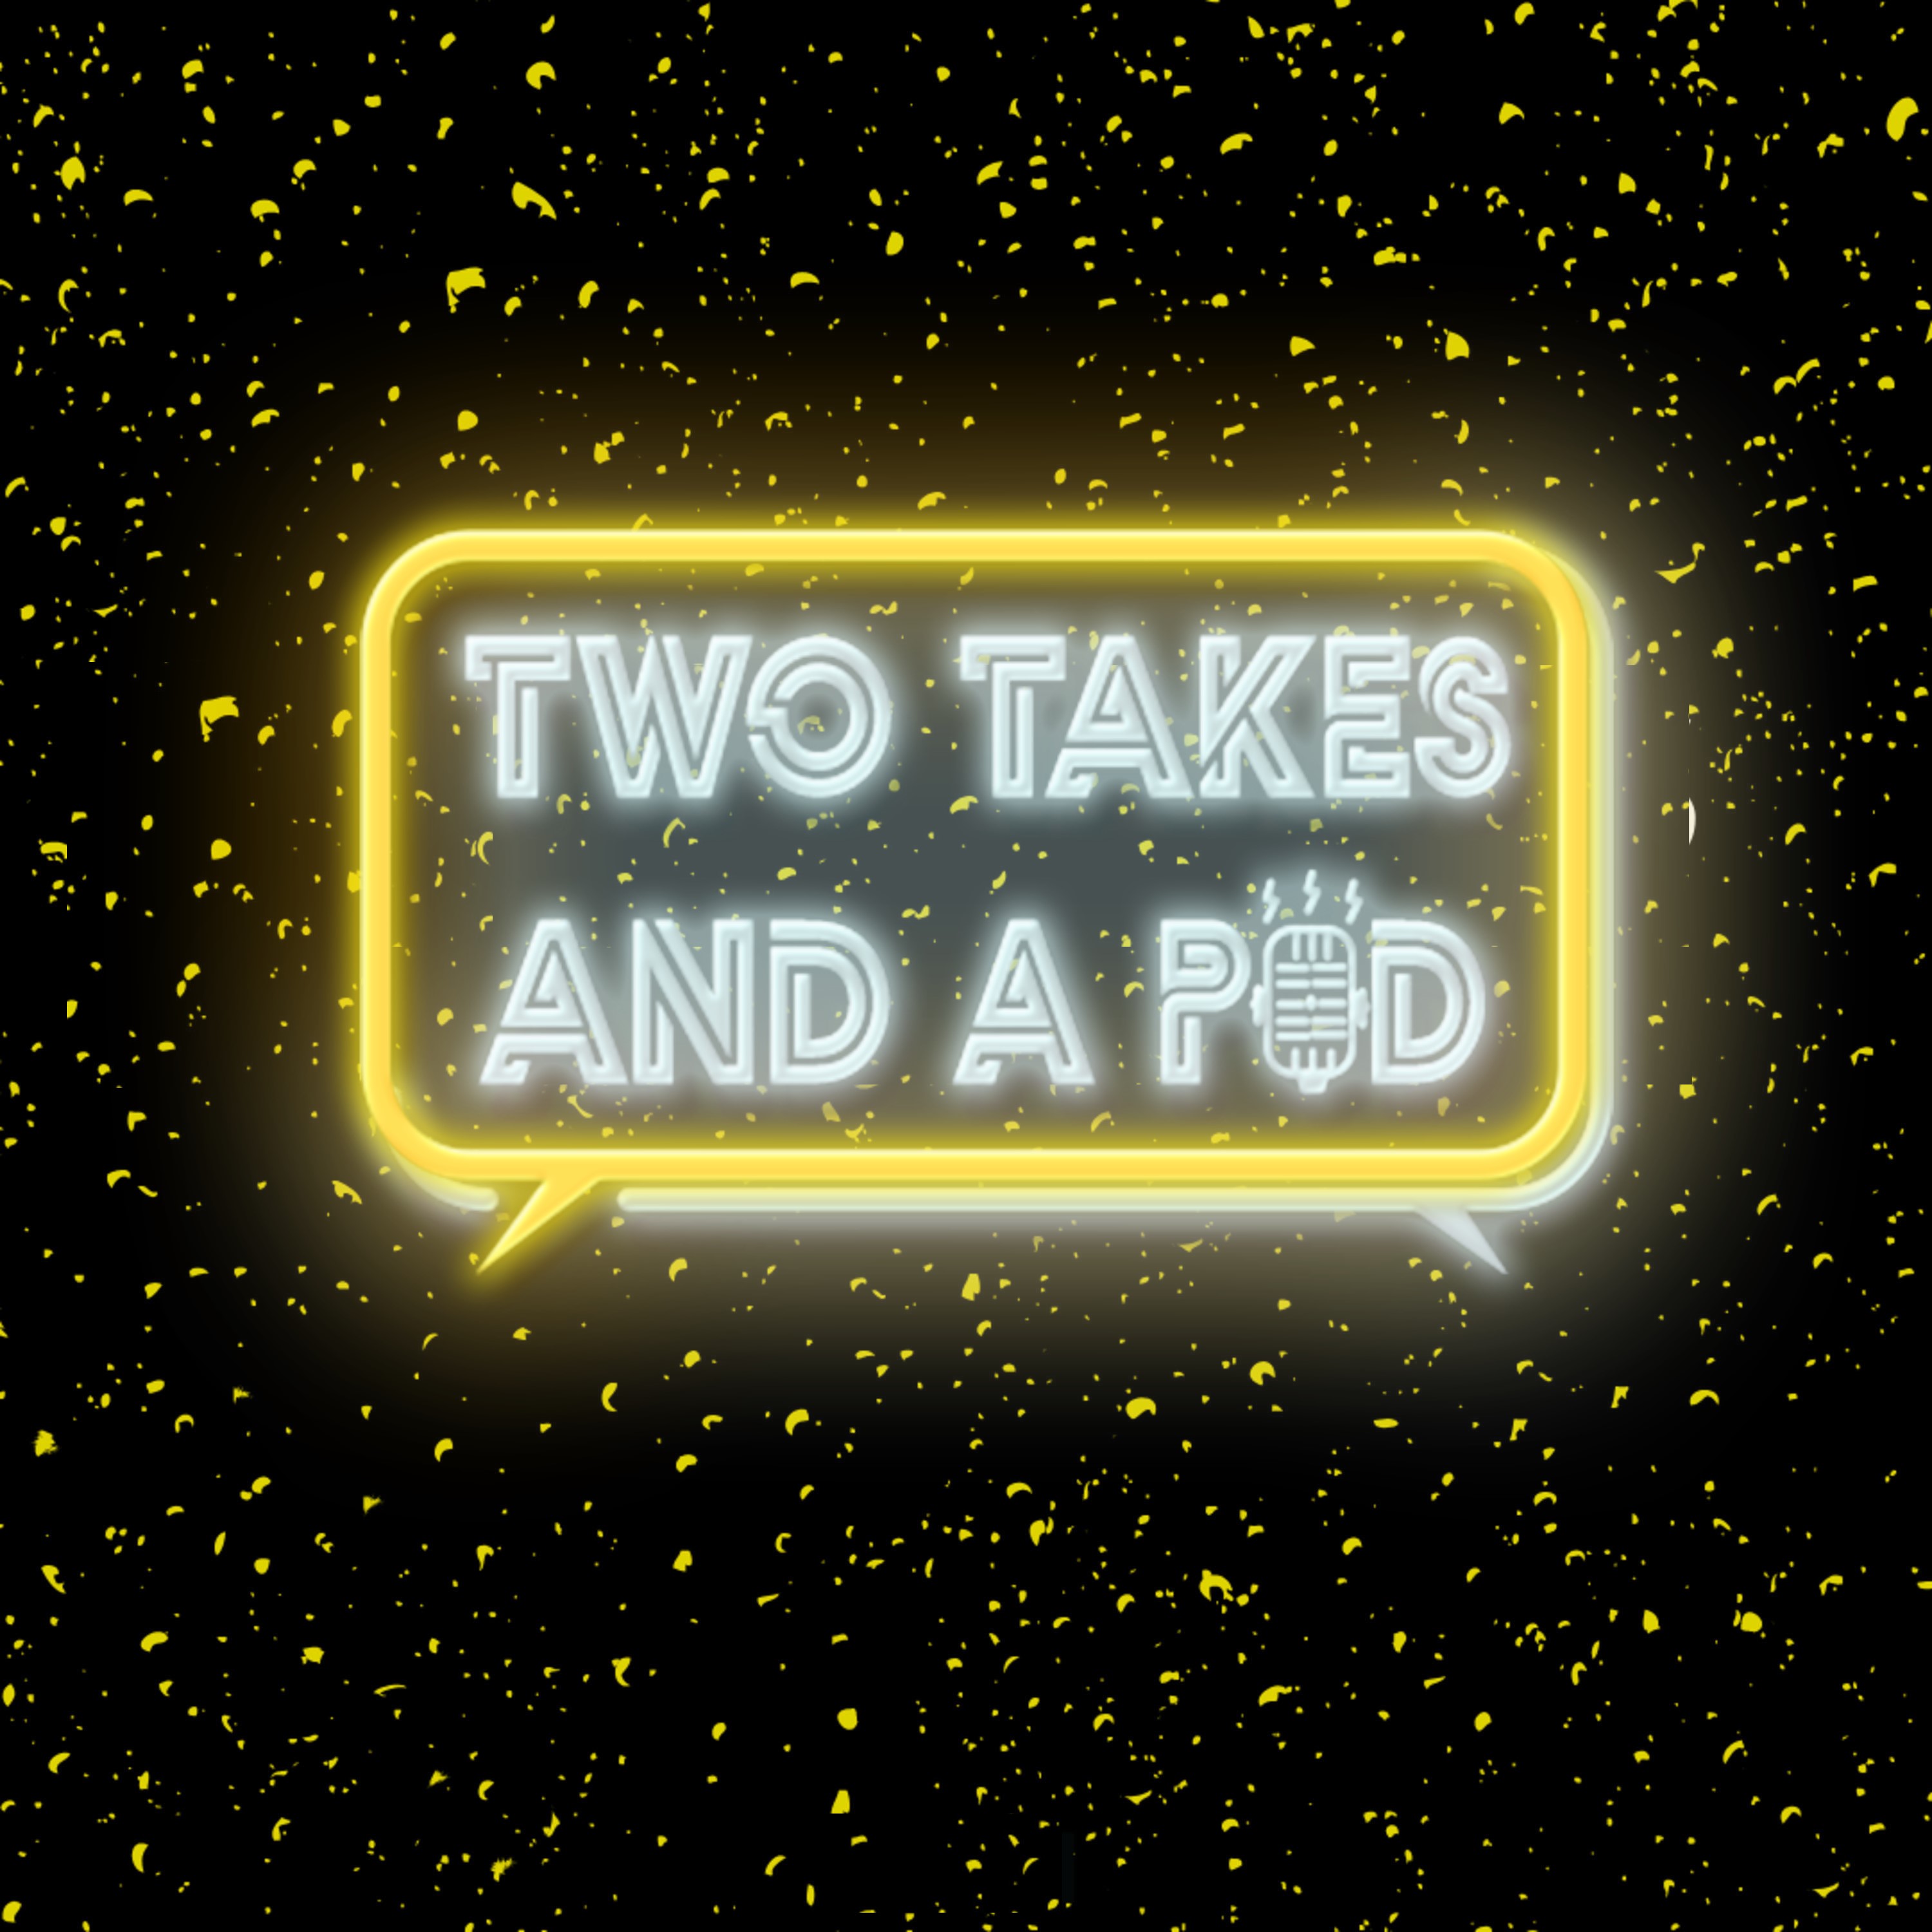 Show artwork for Two Takes and a Pod